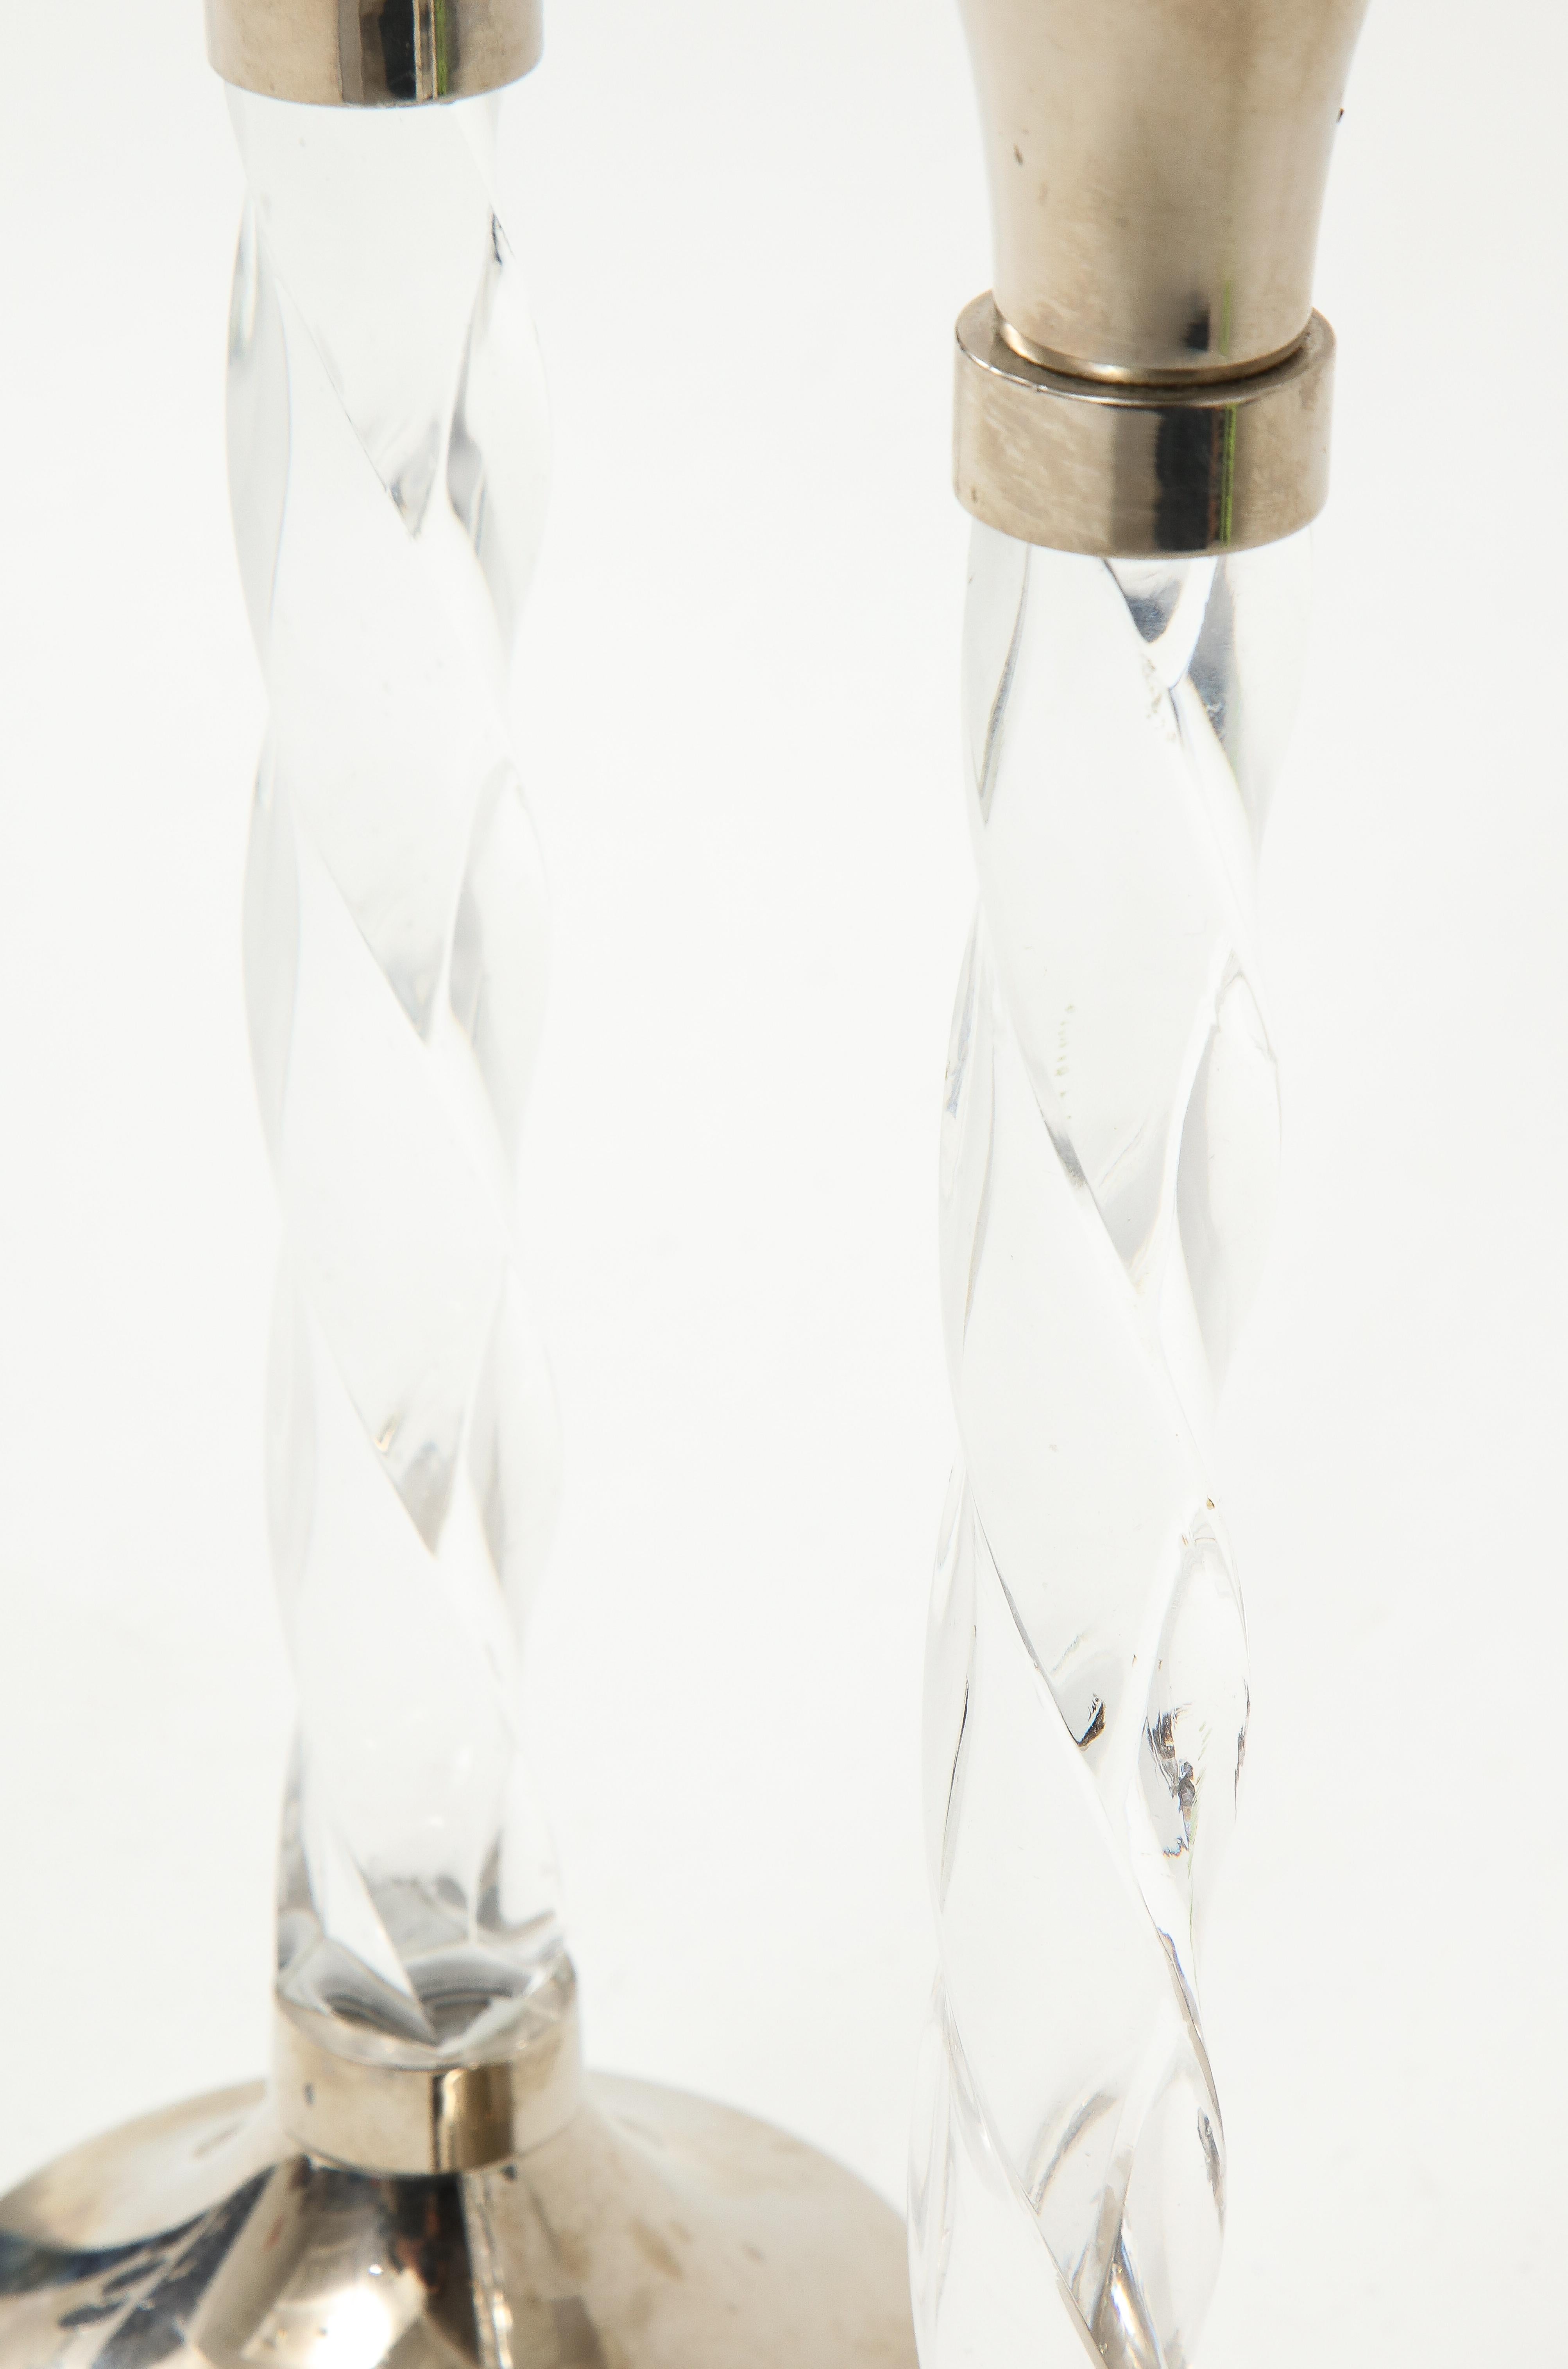 Hollywood Regency Pair of Silver Candlesticks with Glass Barley Twist Stems 